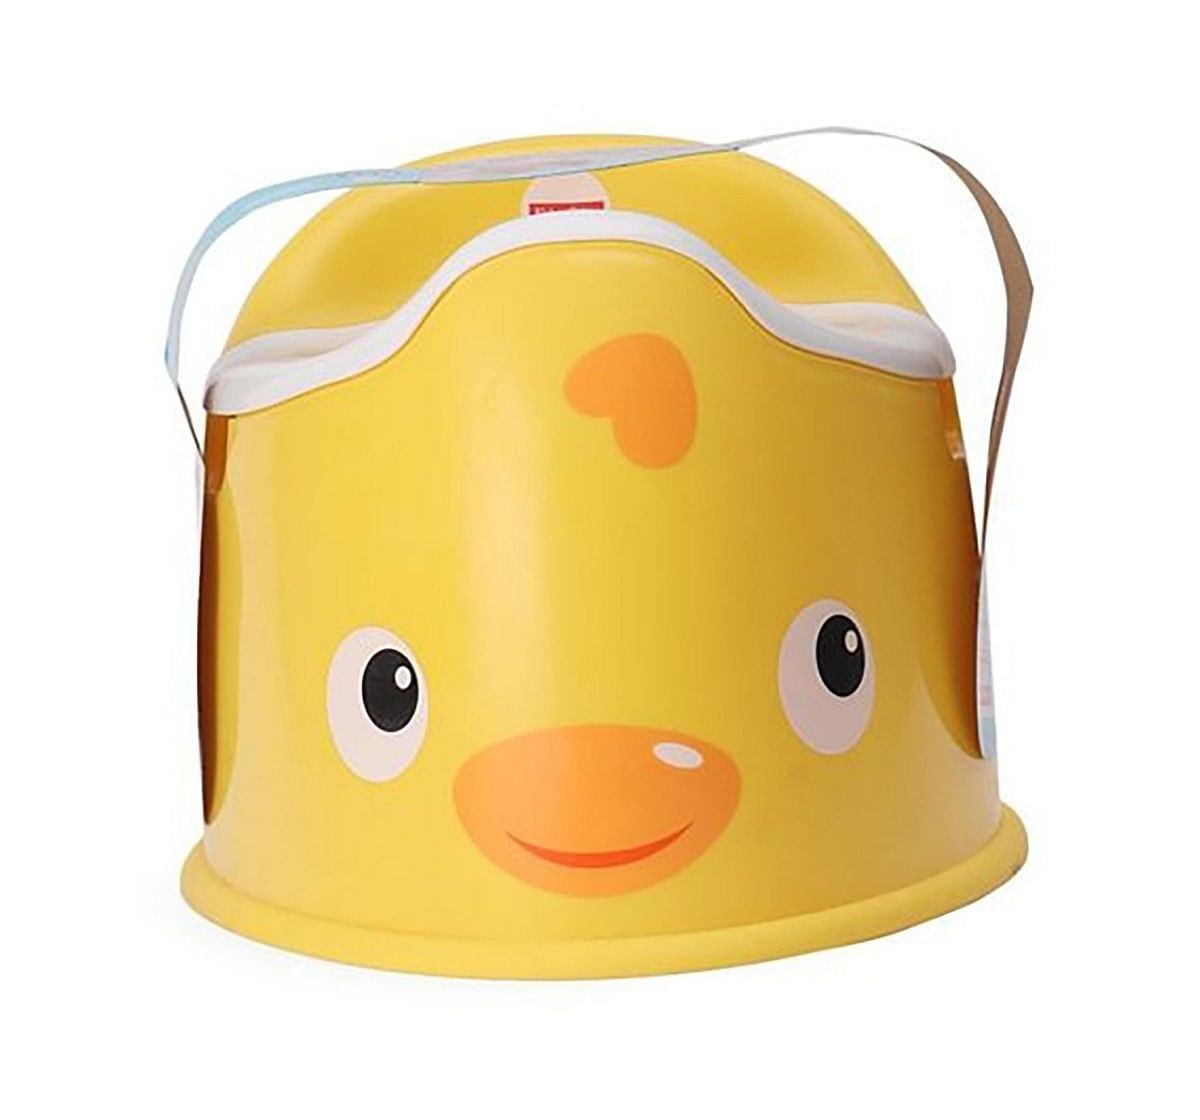 Fisher Price Potty Seat - Yellow Baby Gear for Kids age 9M+ (Yellow)